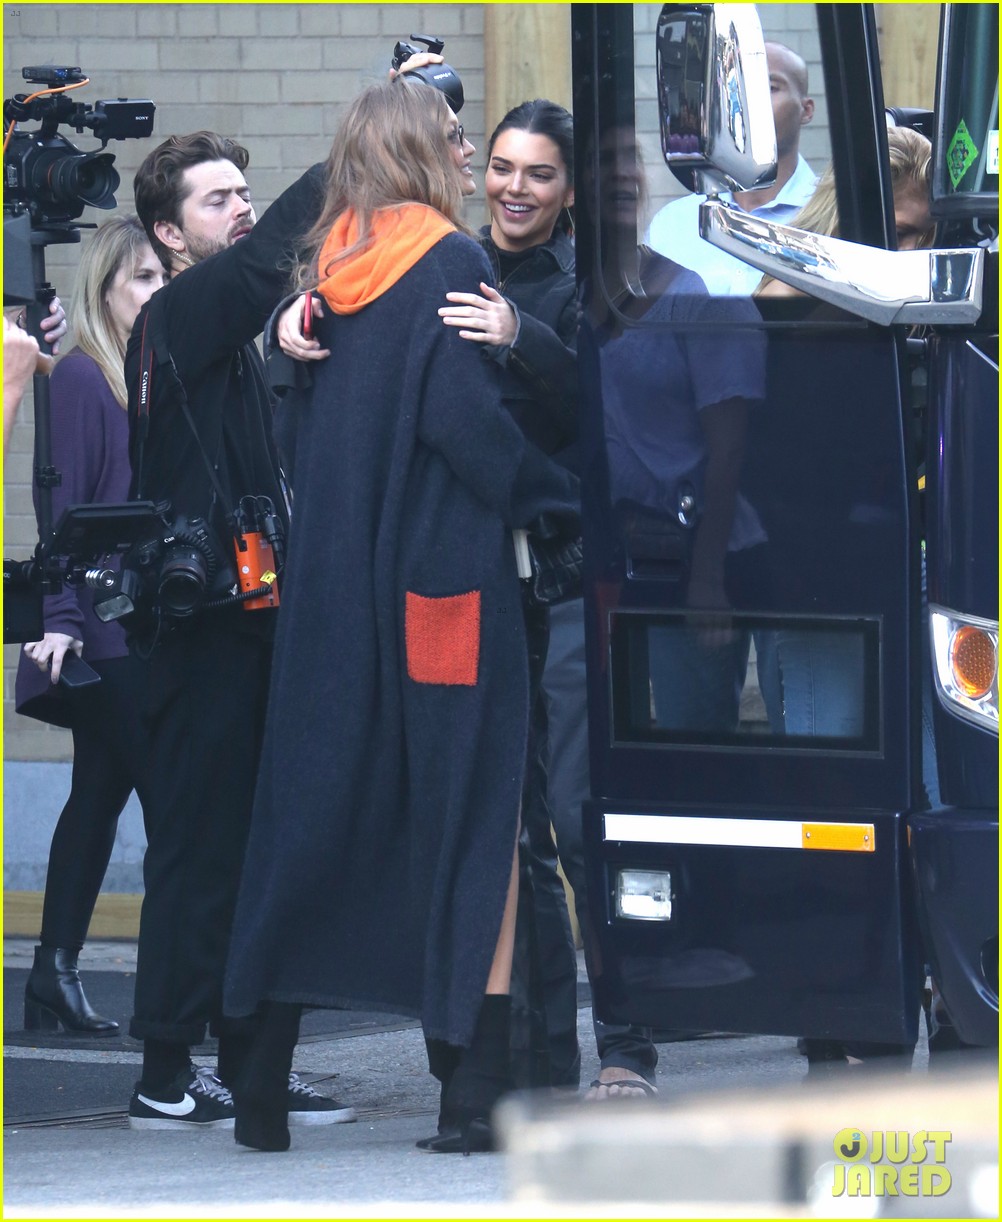 gigi hadid and kendall jenner share a hug outside of victorias secret fashion show rehearsals 08